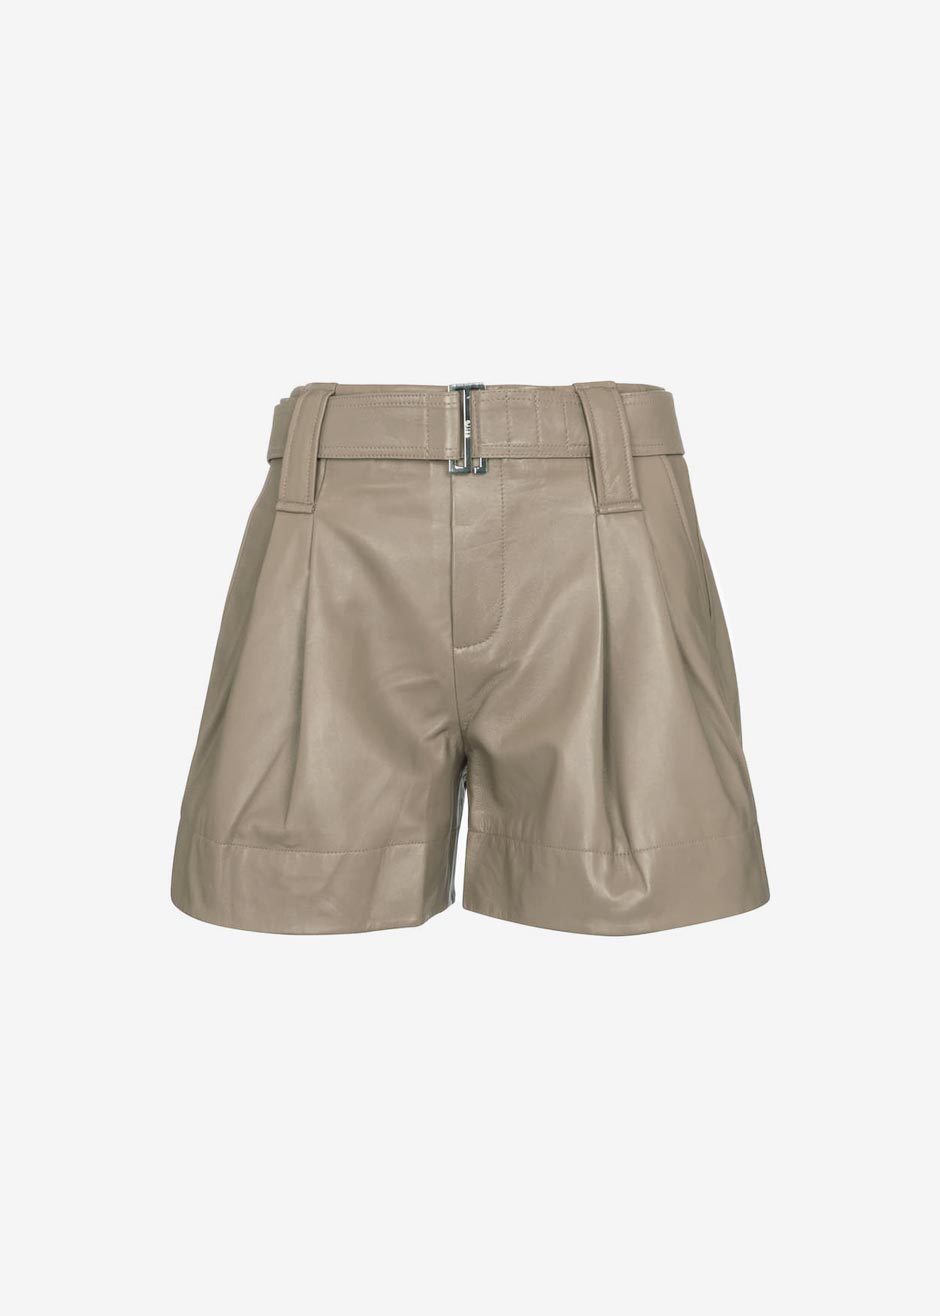 GANNI Belted Leather Shorts - Fossil - 8